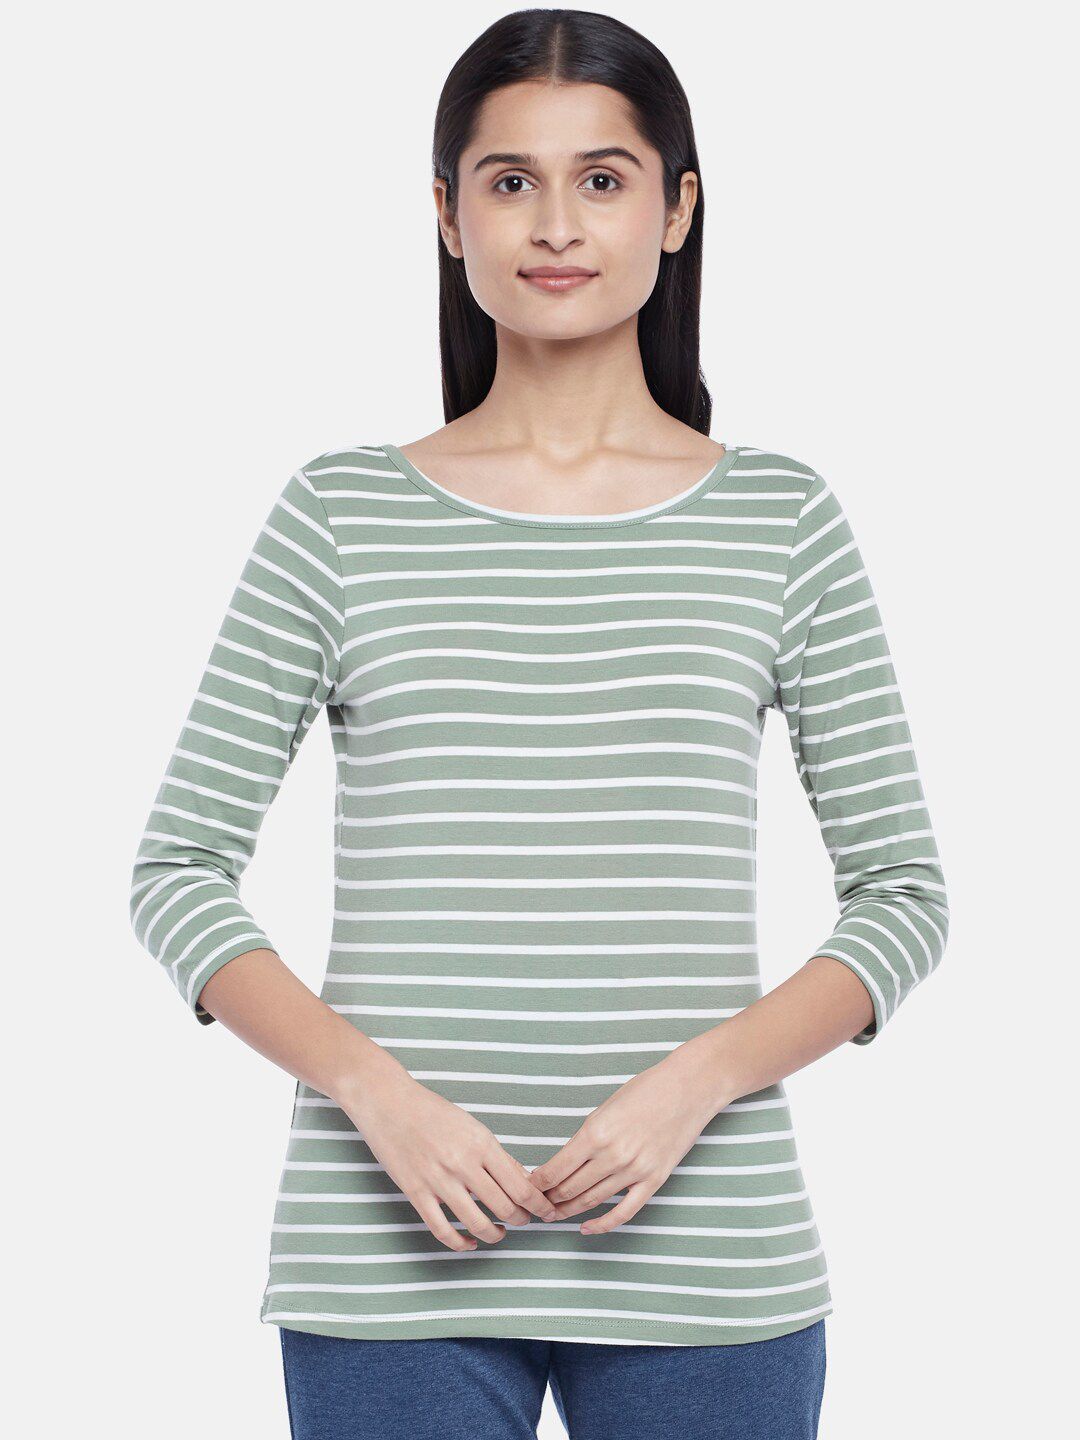 Dreamz by Pantaloons Olive Green Striped Lounge tshirt Price in India